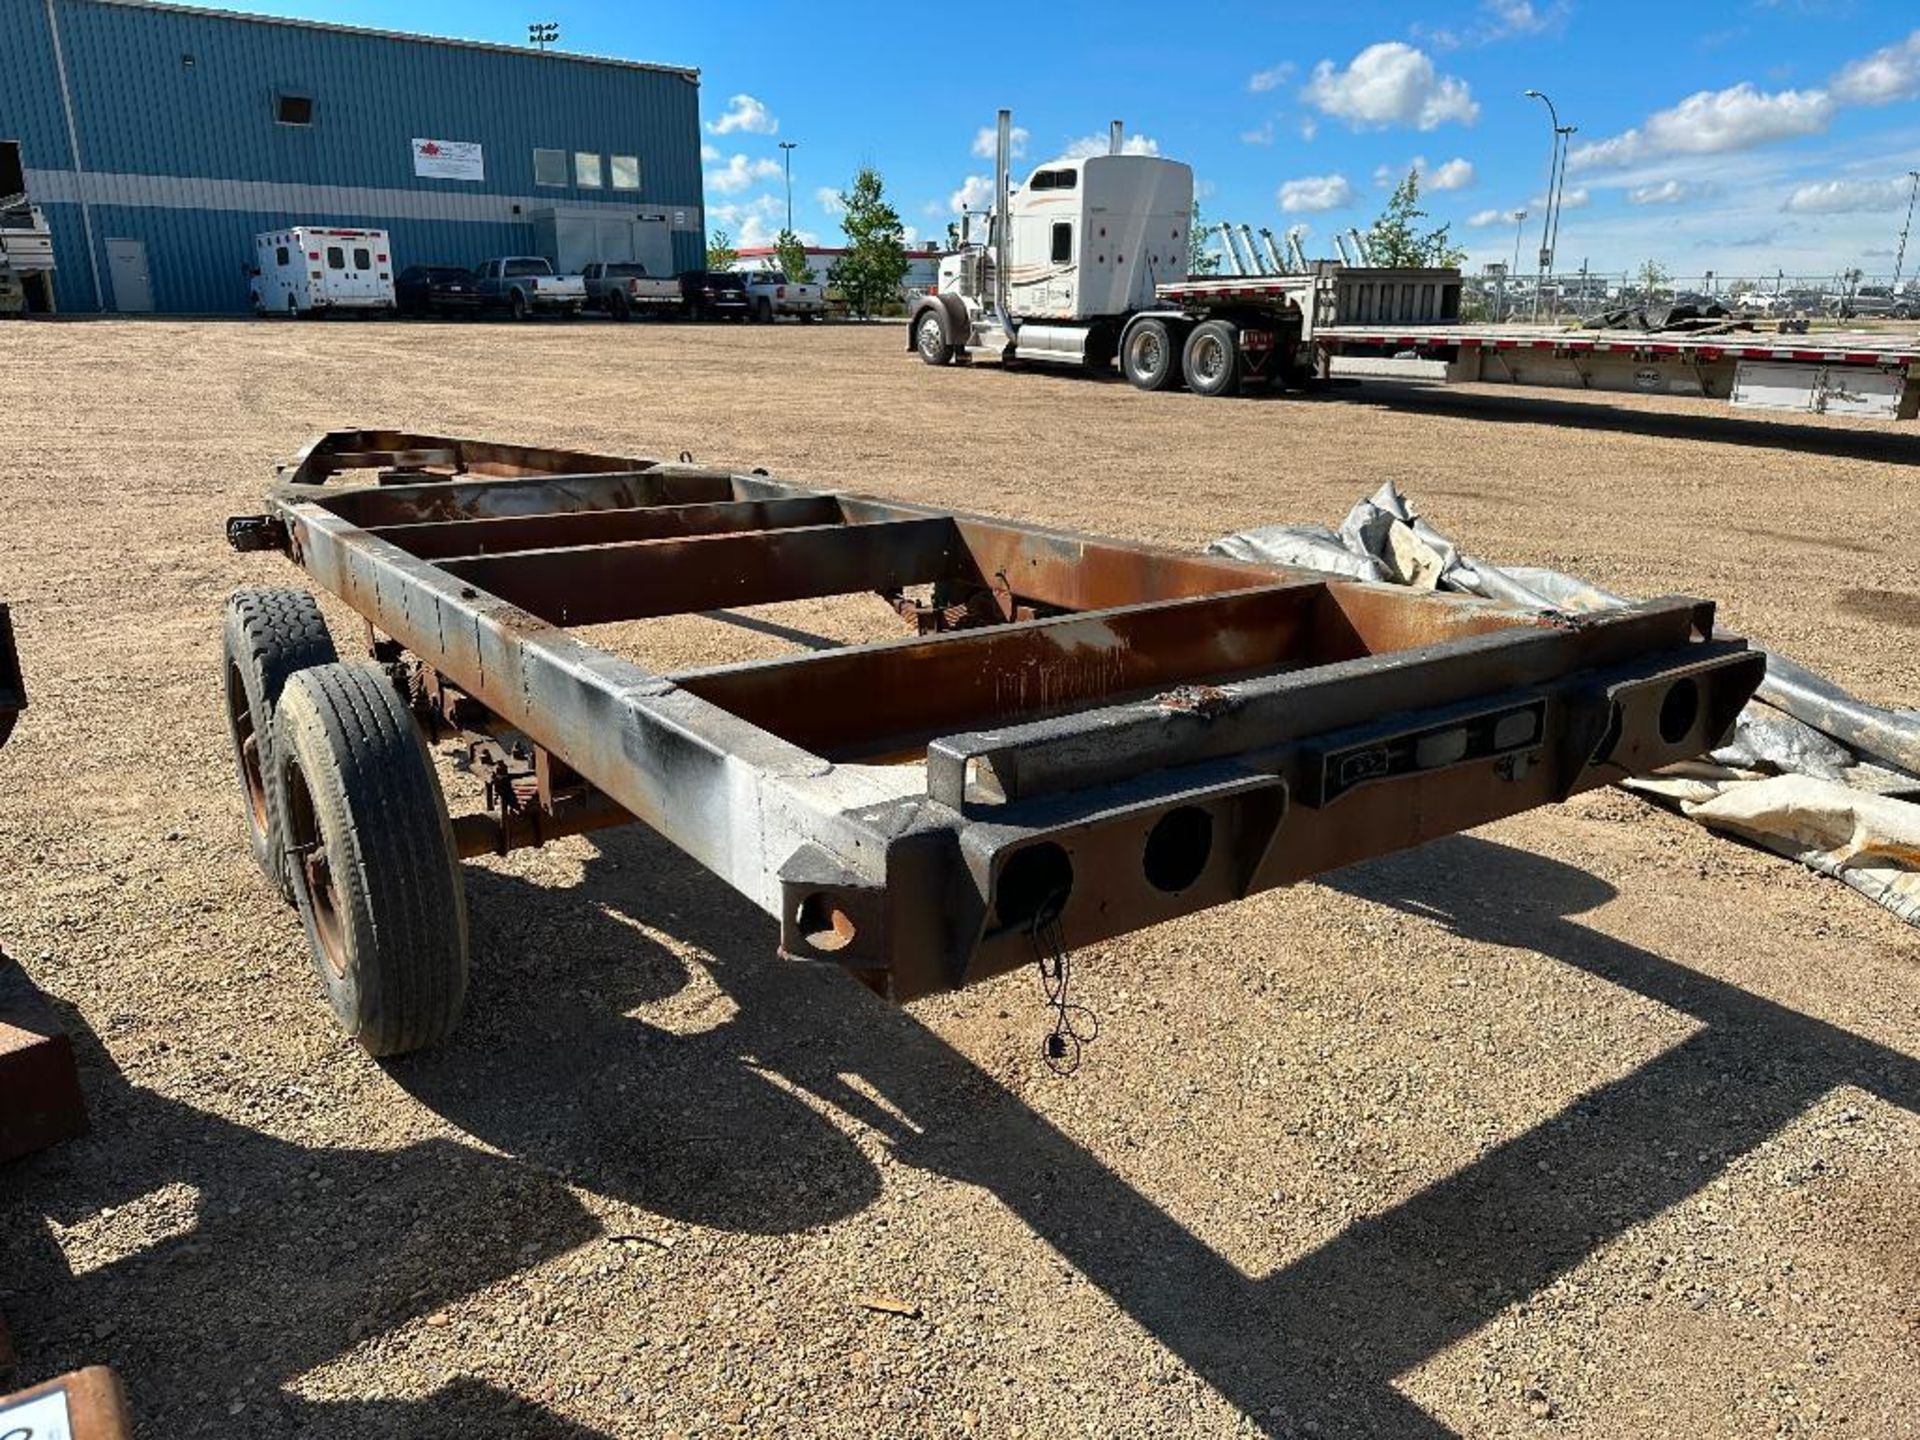 T/A Trailer Frame w/ Pintle Hitch, 14’ x 70” Deck Area, etc. - Image 5 of 9